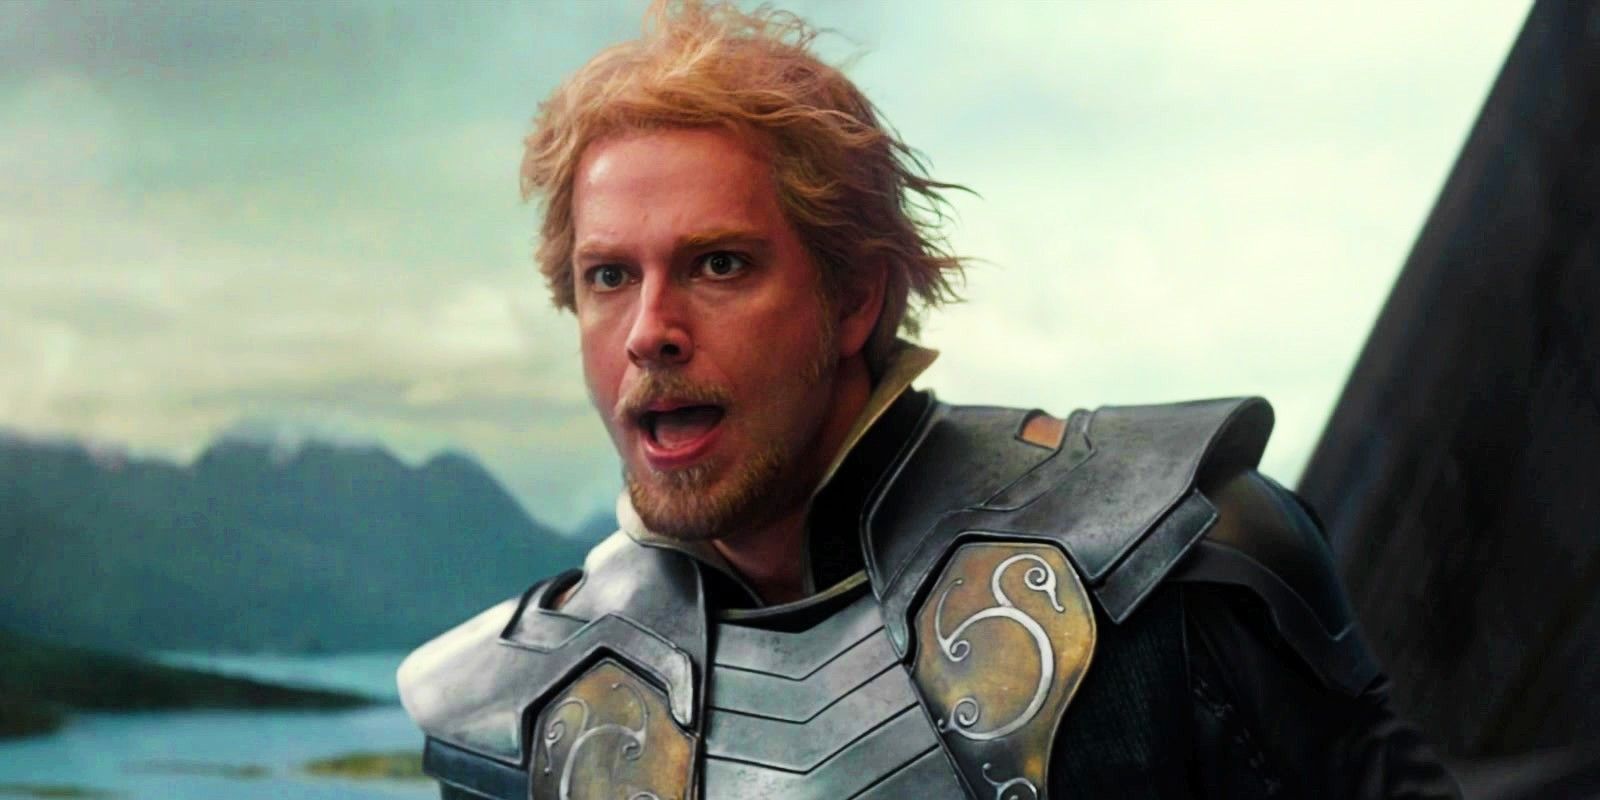 Zachary Levi as Fandral in Thor The Dark World